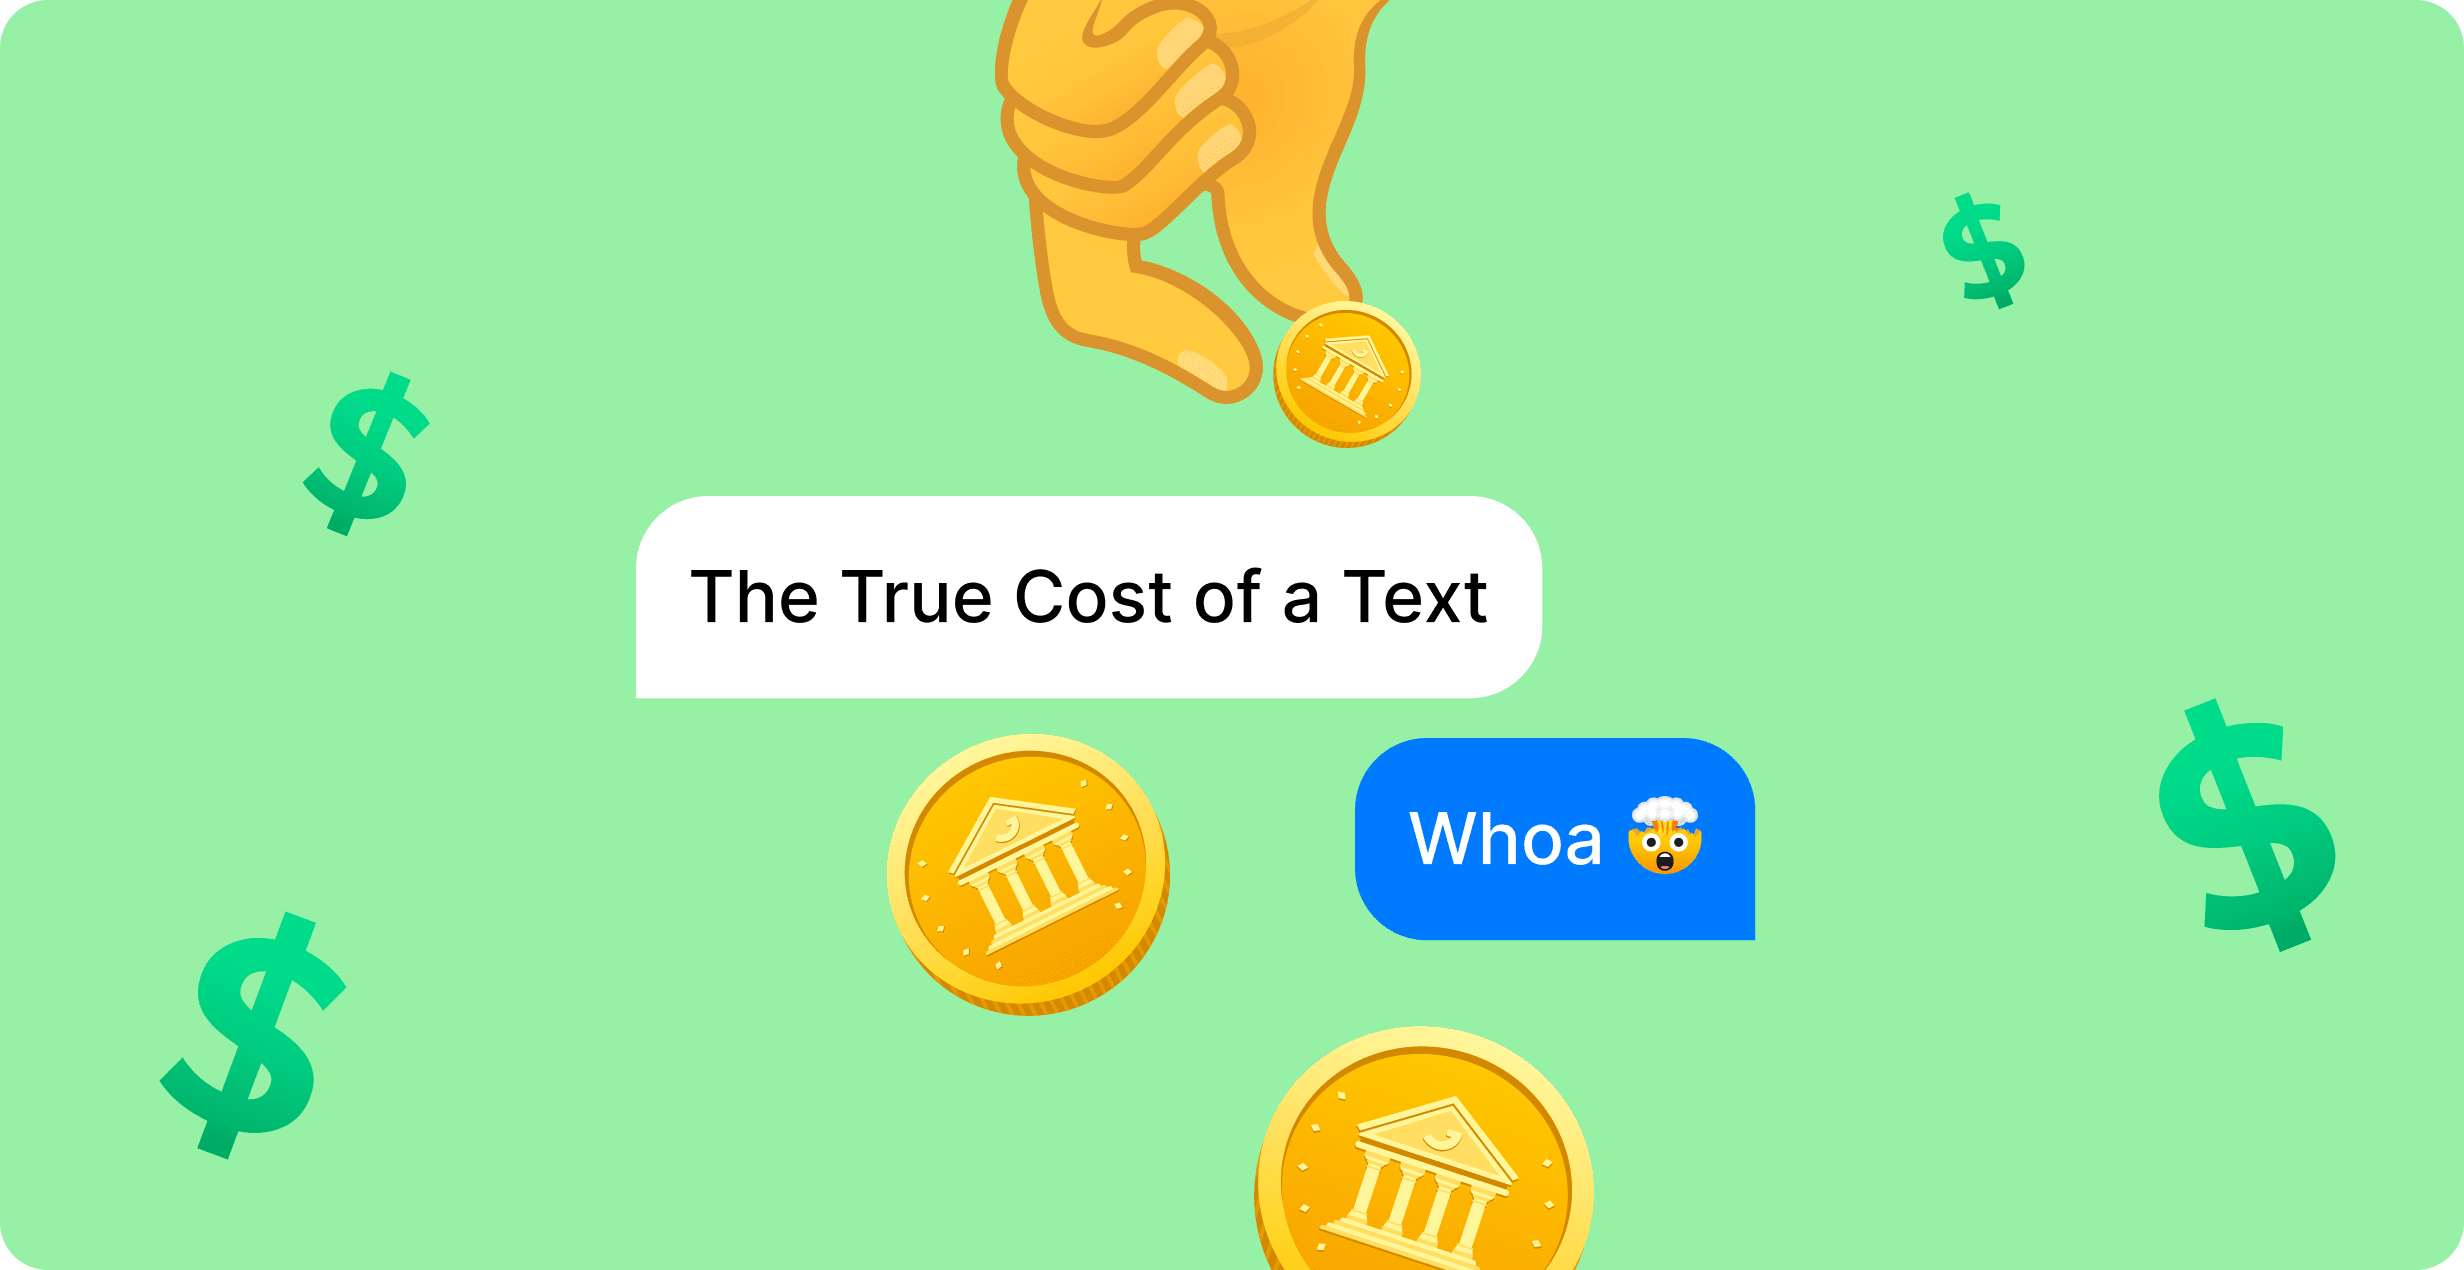 The True Cost of a Text: How to Find and Maximize the Best SMS Pricing for your Brand